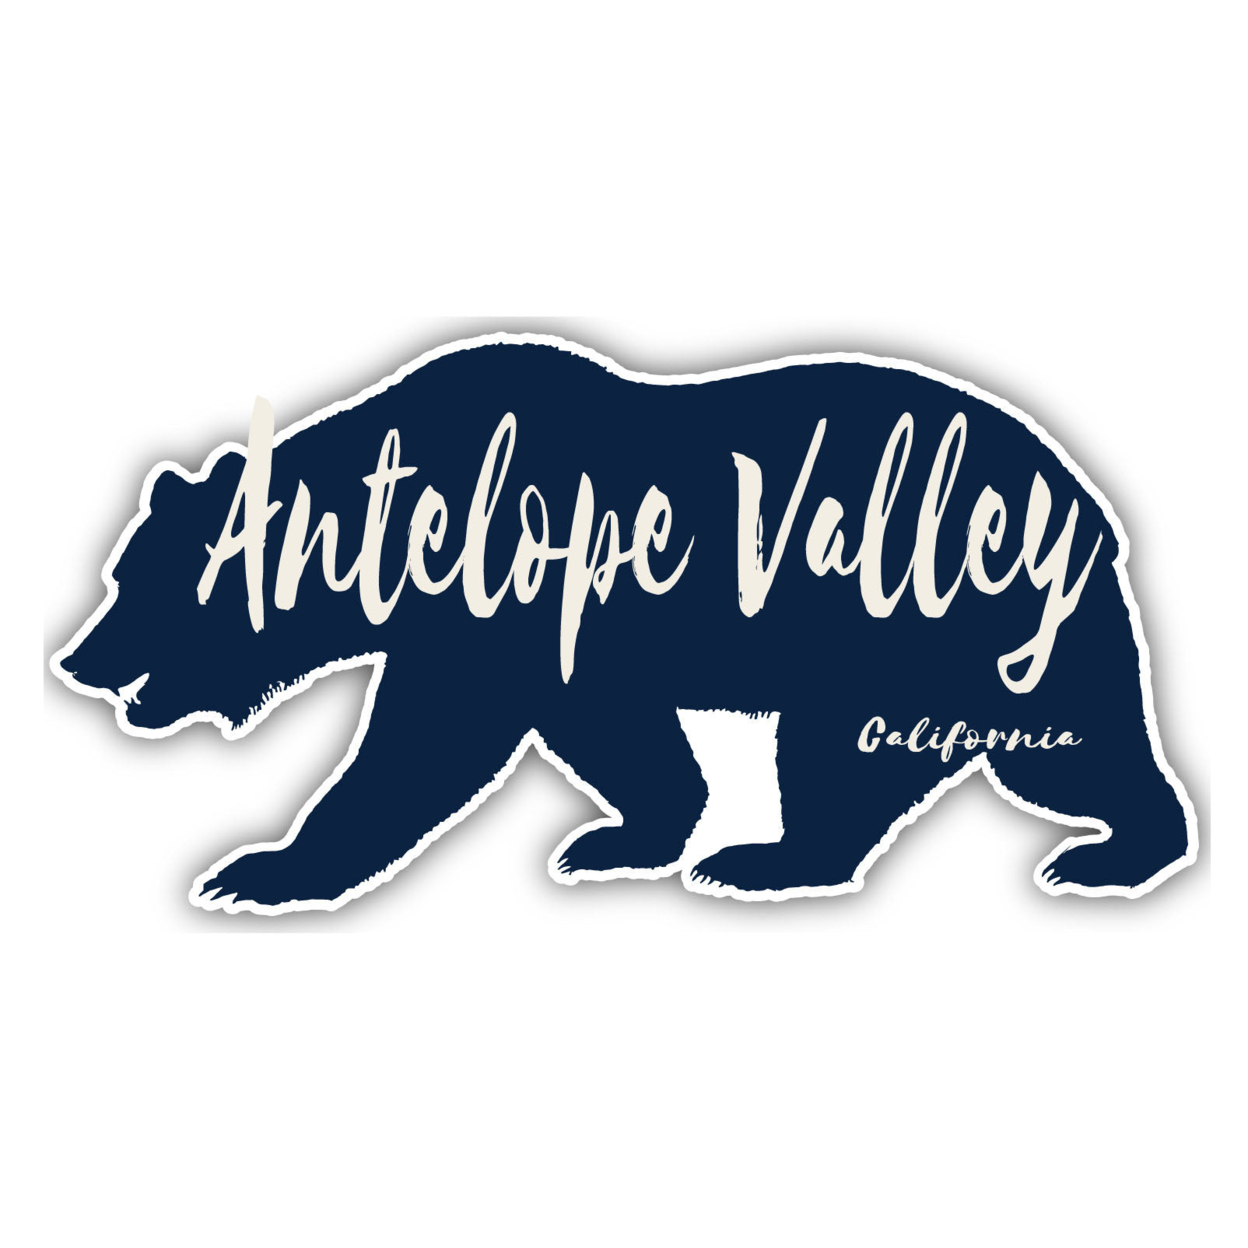 Antelope Valley California Souvenir Decorative Stickers (Choose Theme And Size) - Single Unit, 8-Inch, Bear